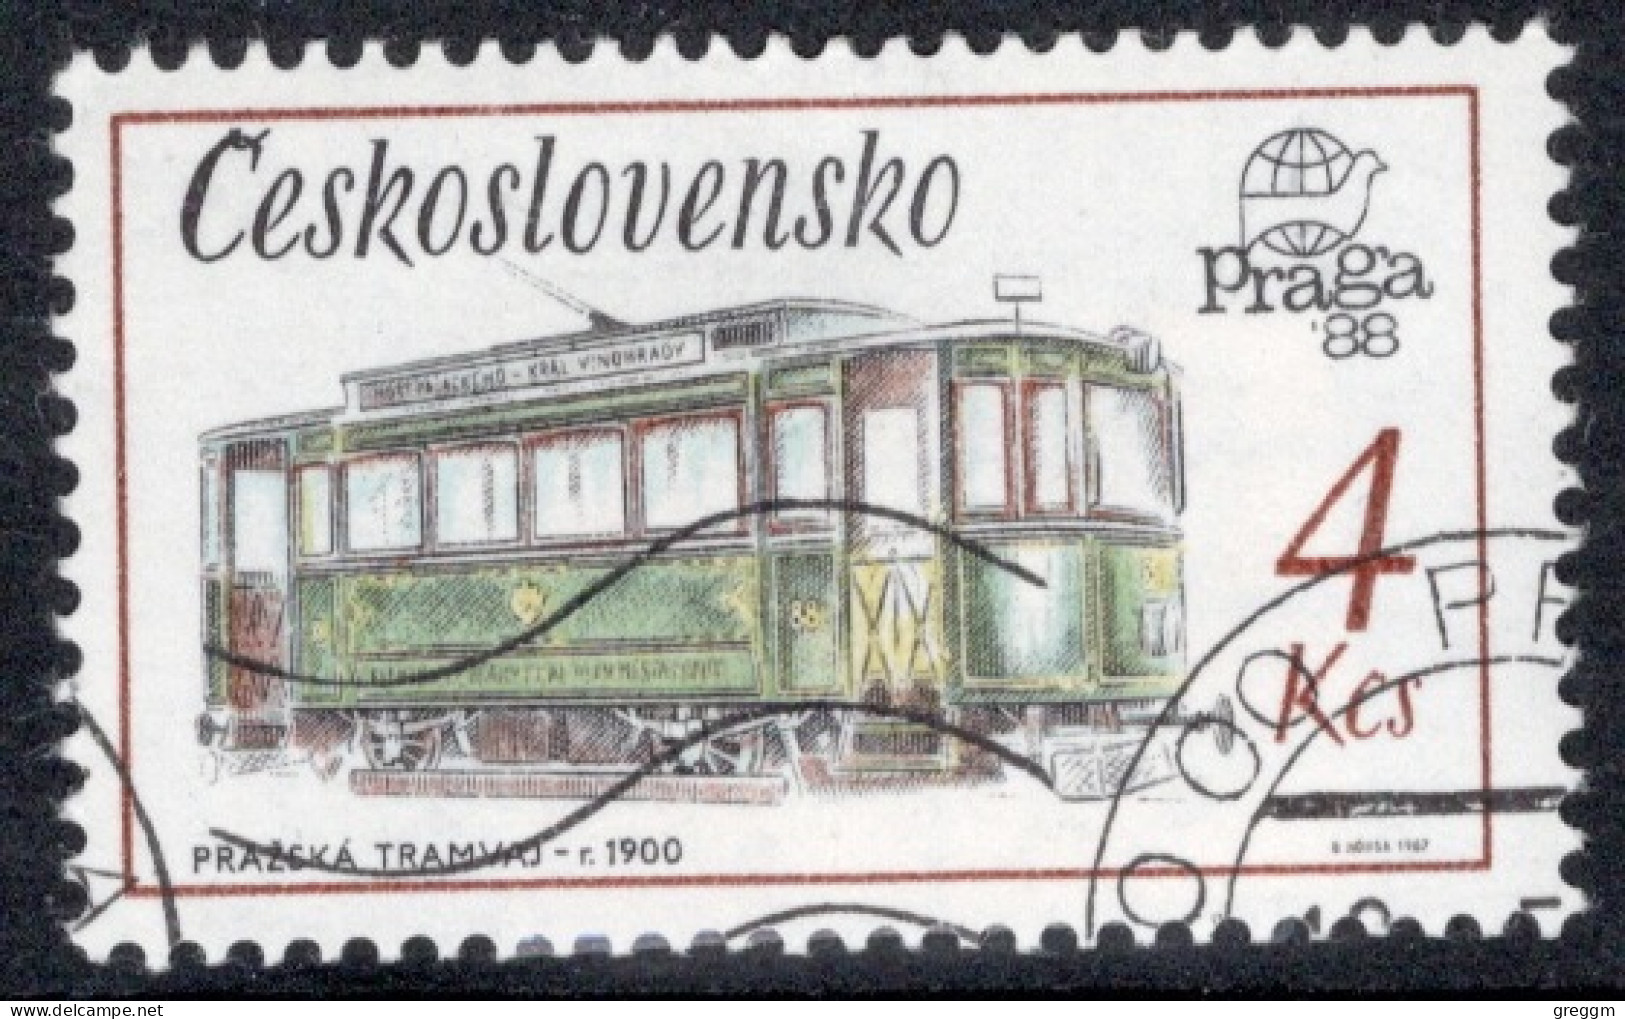 Czechoslovakia 1987 Single Stamp To Celebrate Praga 88 International Stamp Exhibition - Technical Monuments In Fine Used - Oblitérés